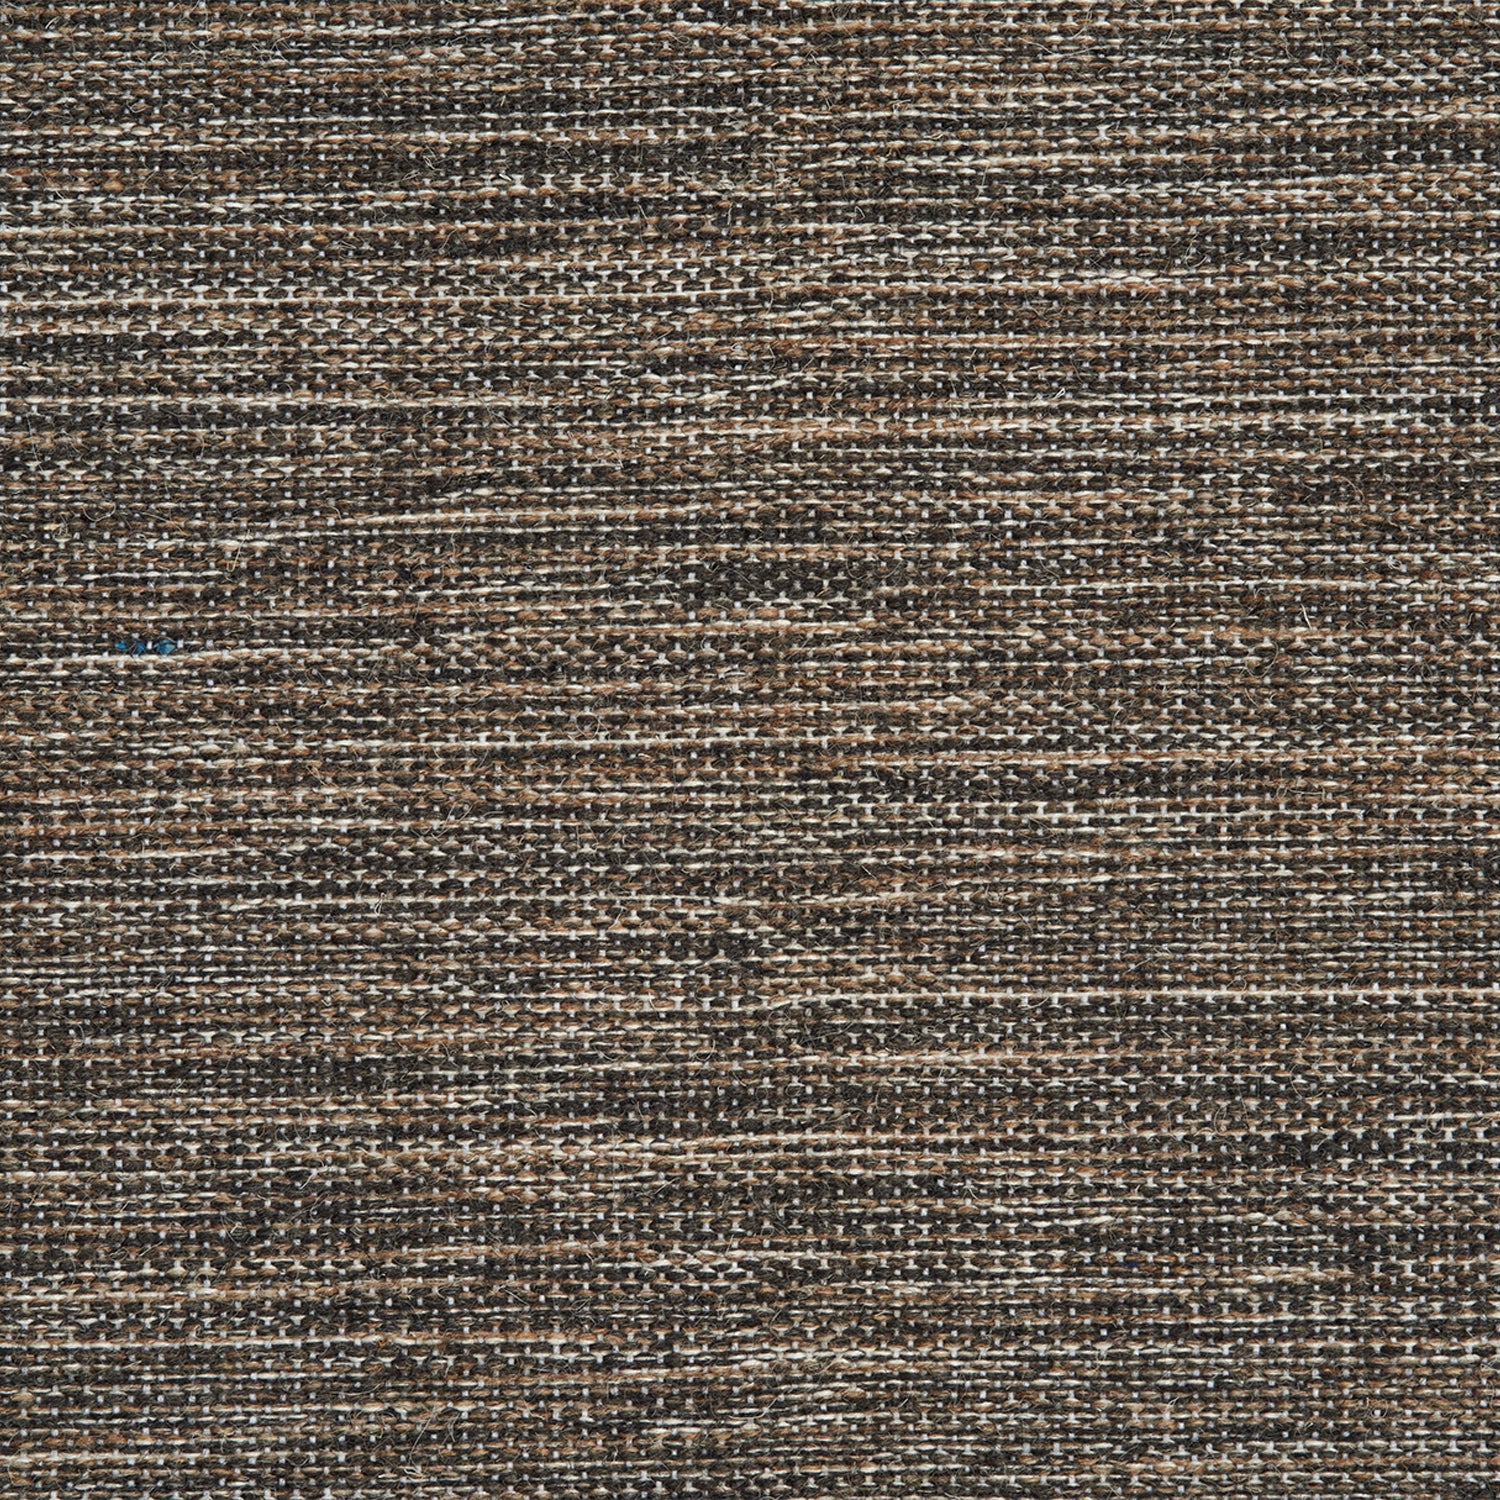 Wool-blend broadloom carpet swatch in a chunky mottled brown and charcoal weave.